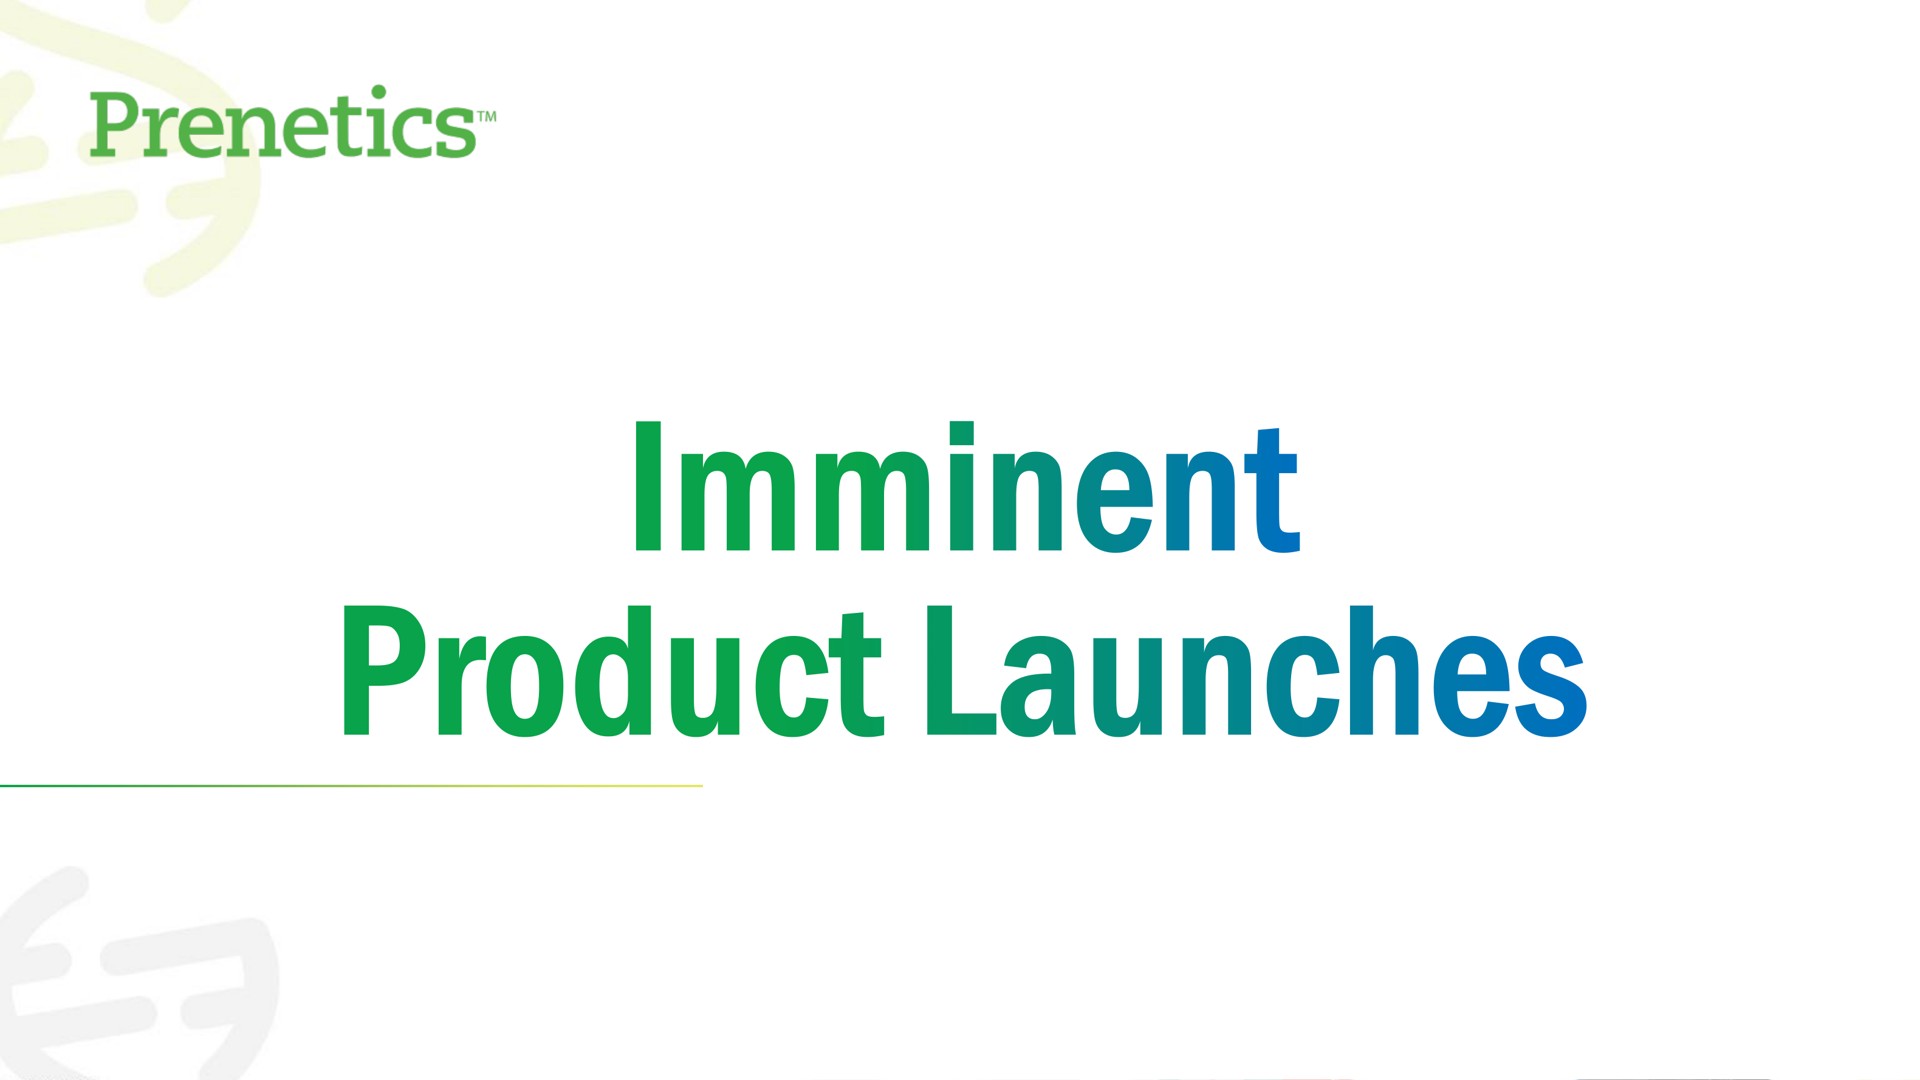 imminent product launches | Prenetics